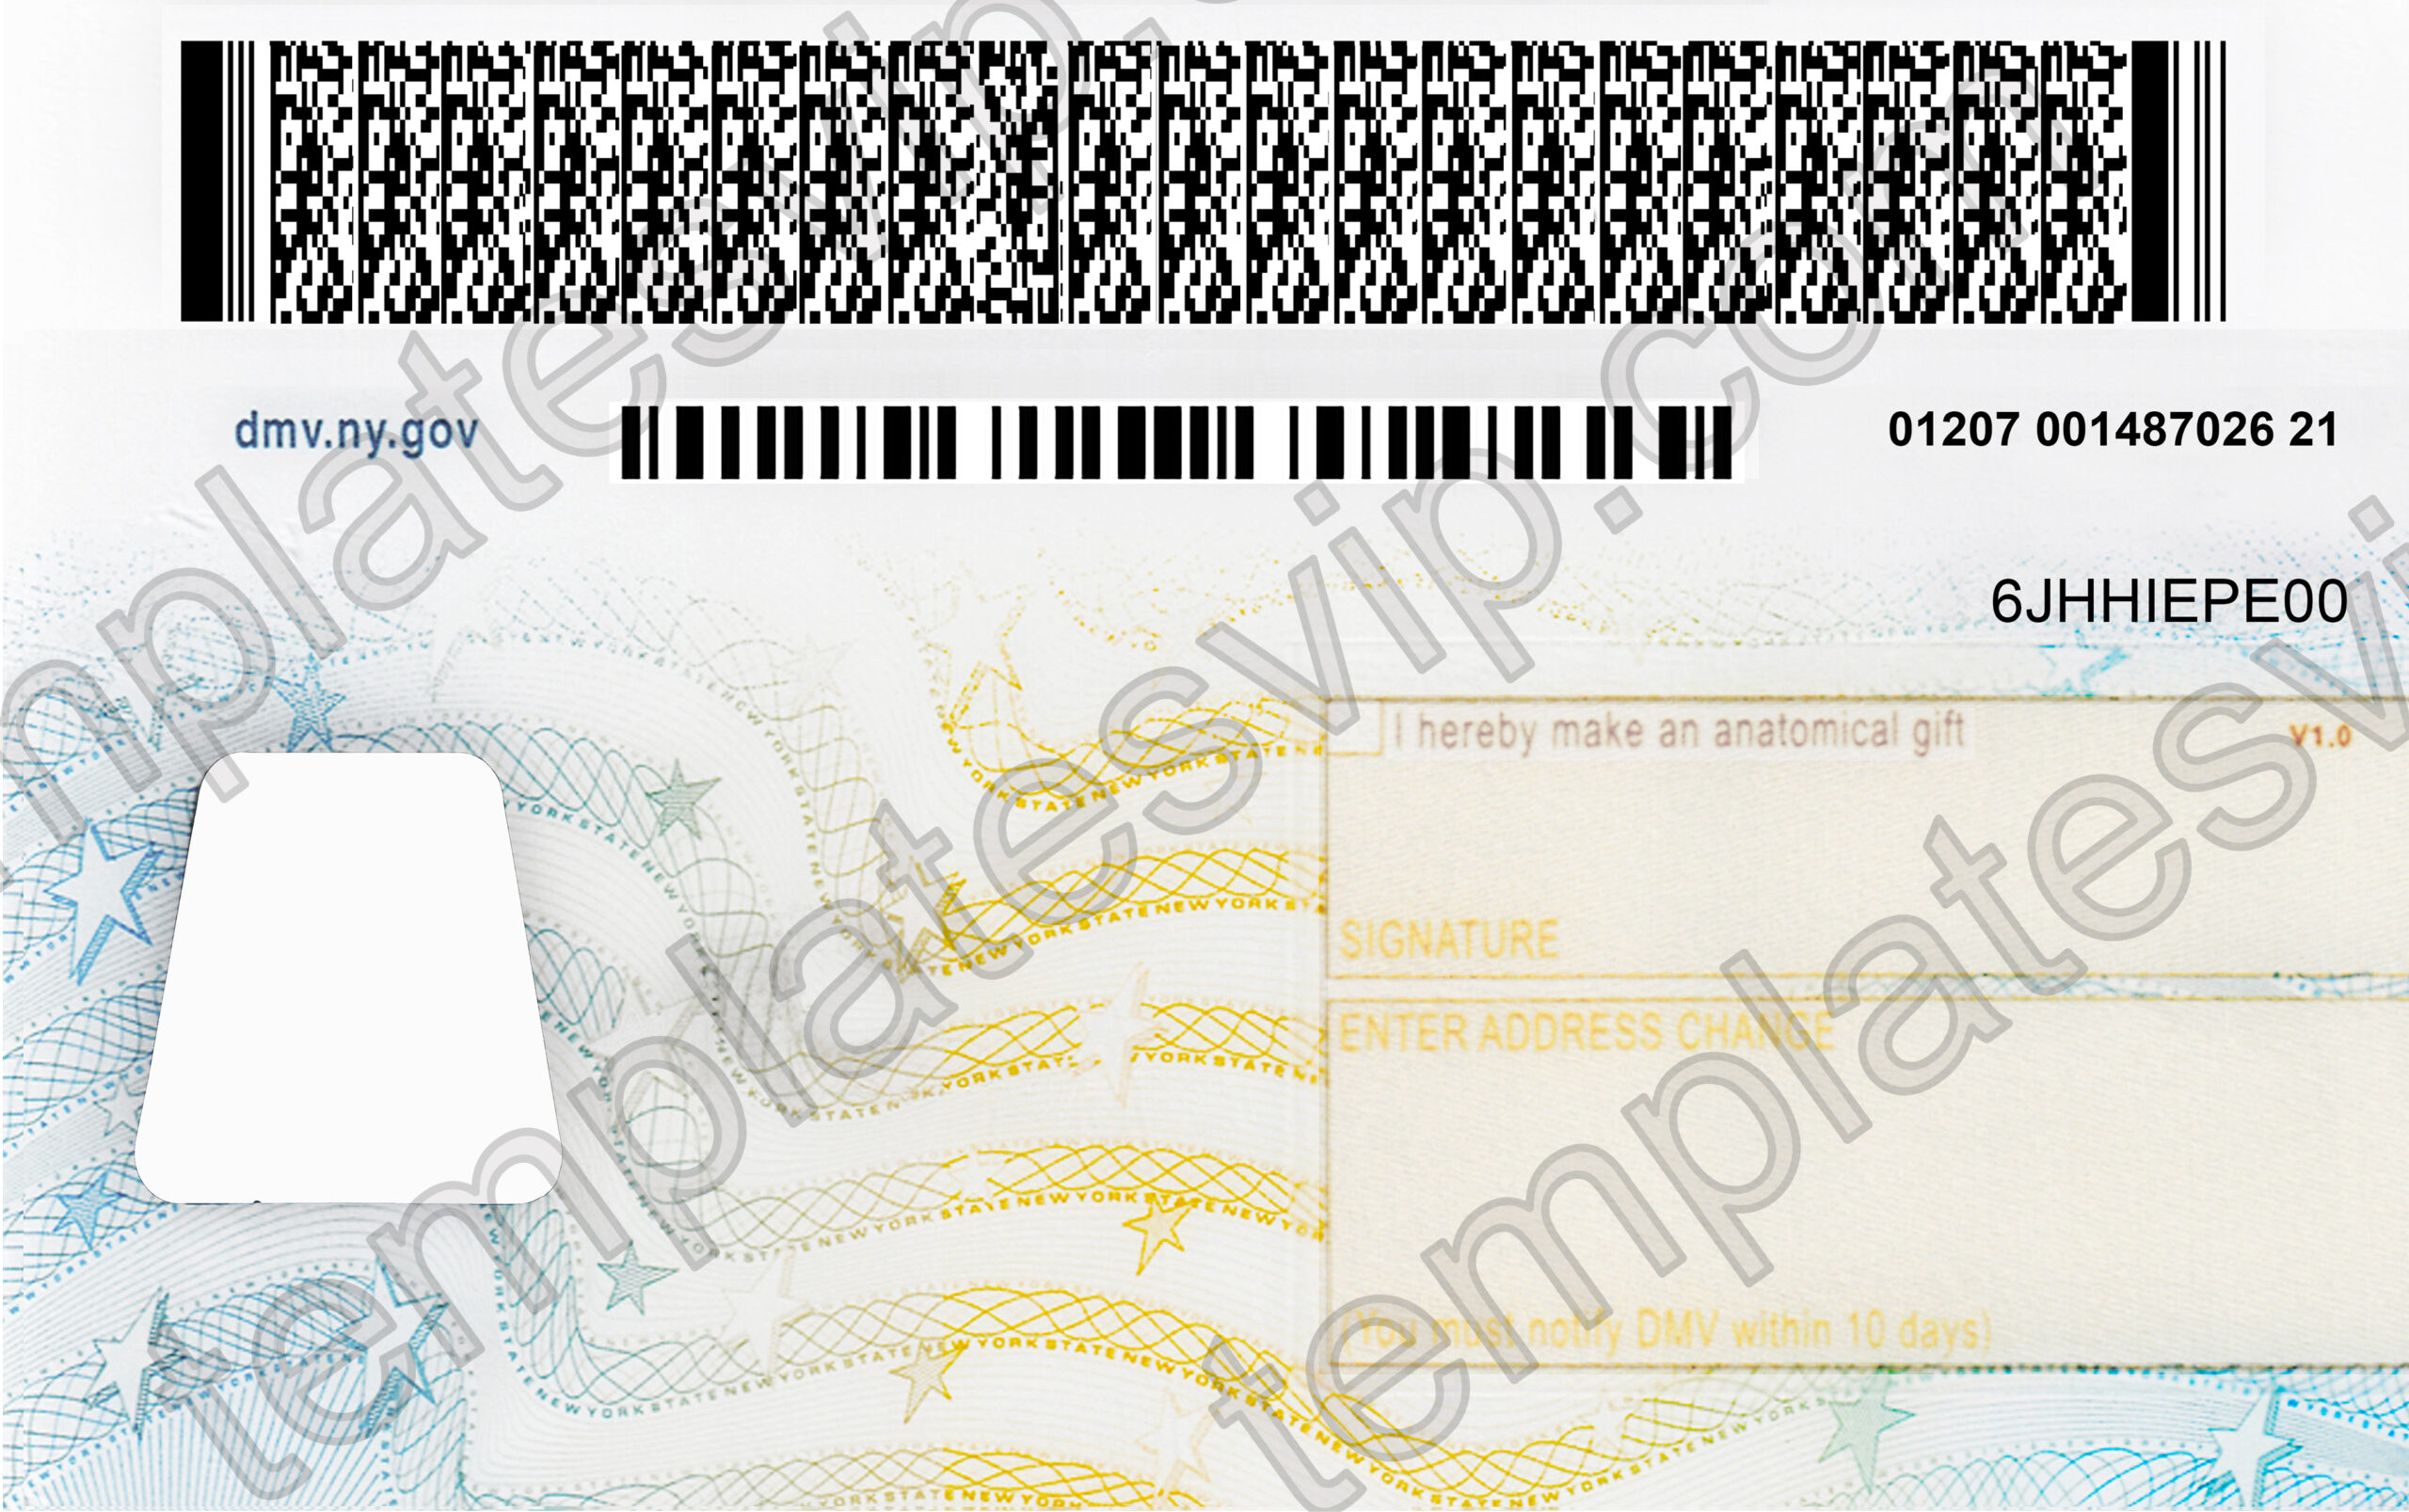 new-york-ny-driver-s-license-psd-template-download-templates